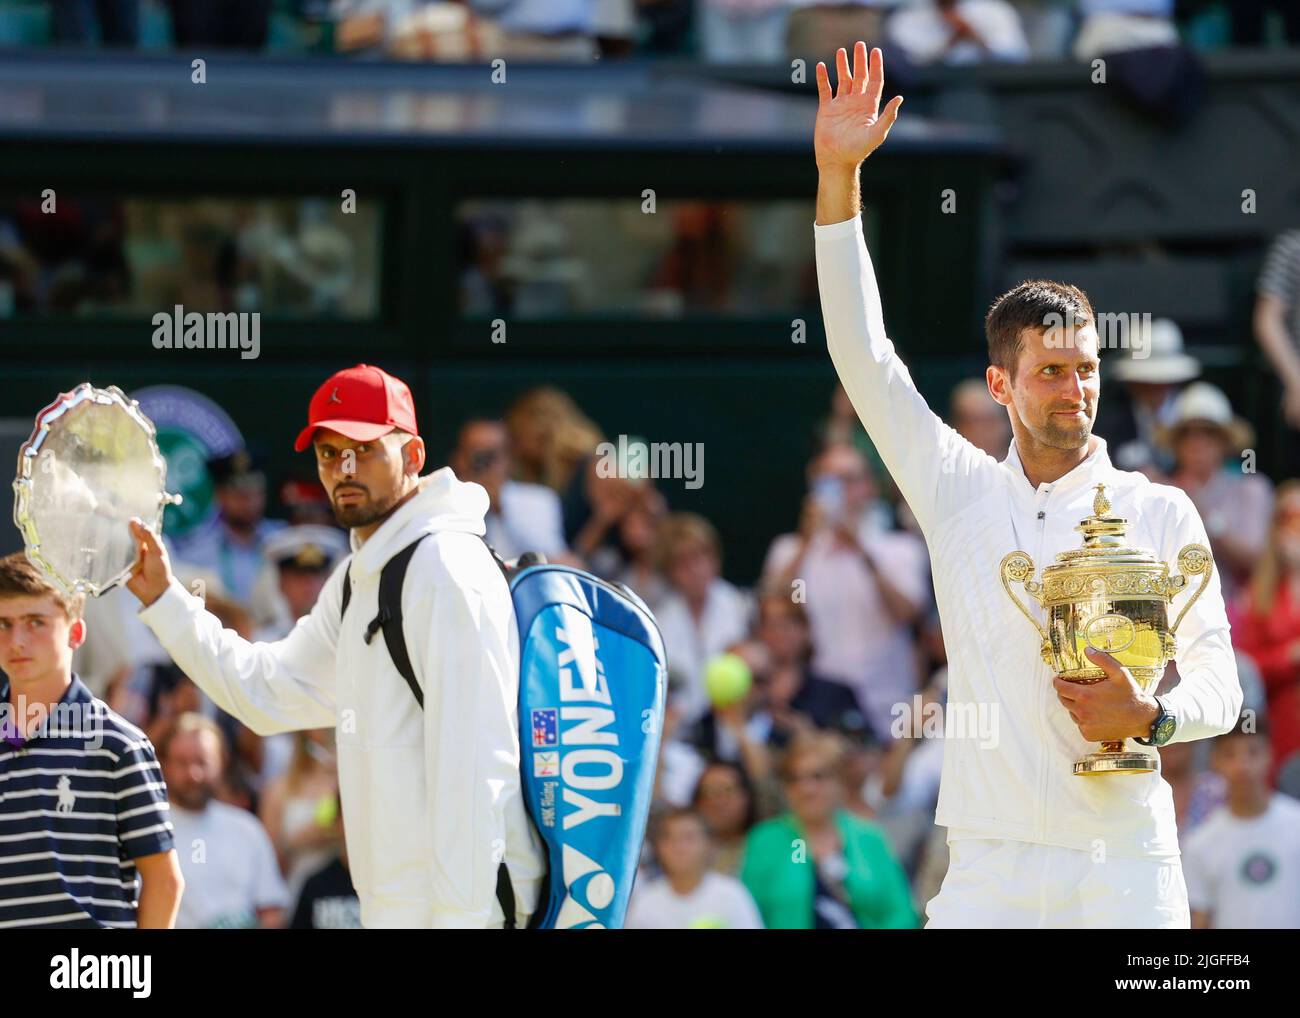 Wimbledon,Great Britain 10th. July, 2022. Champion Novak Djokovic and runner-up Nick Kyrgios during the presentation at the Wimbledon 2022  Championships on Sunday 10 July 2022.,  © Juergen Hasenkopf / Alamy Live News Stock Photo